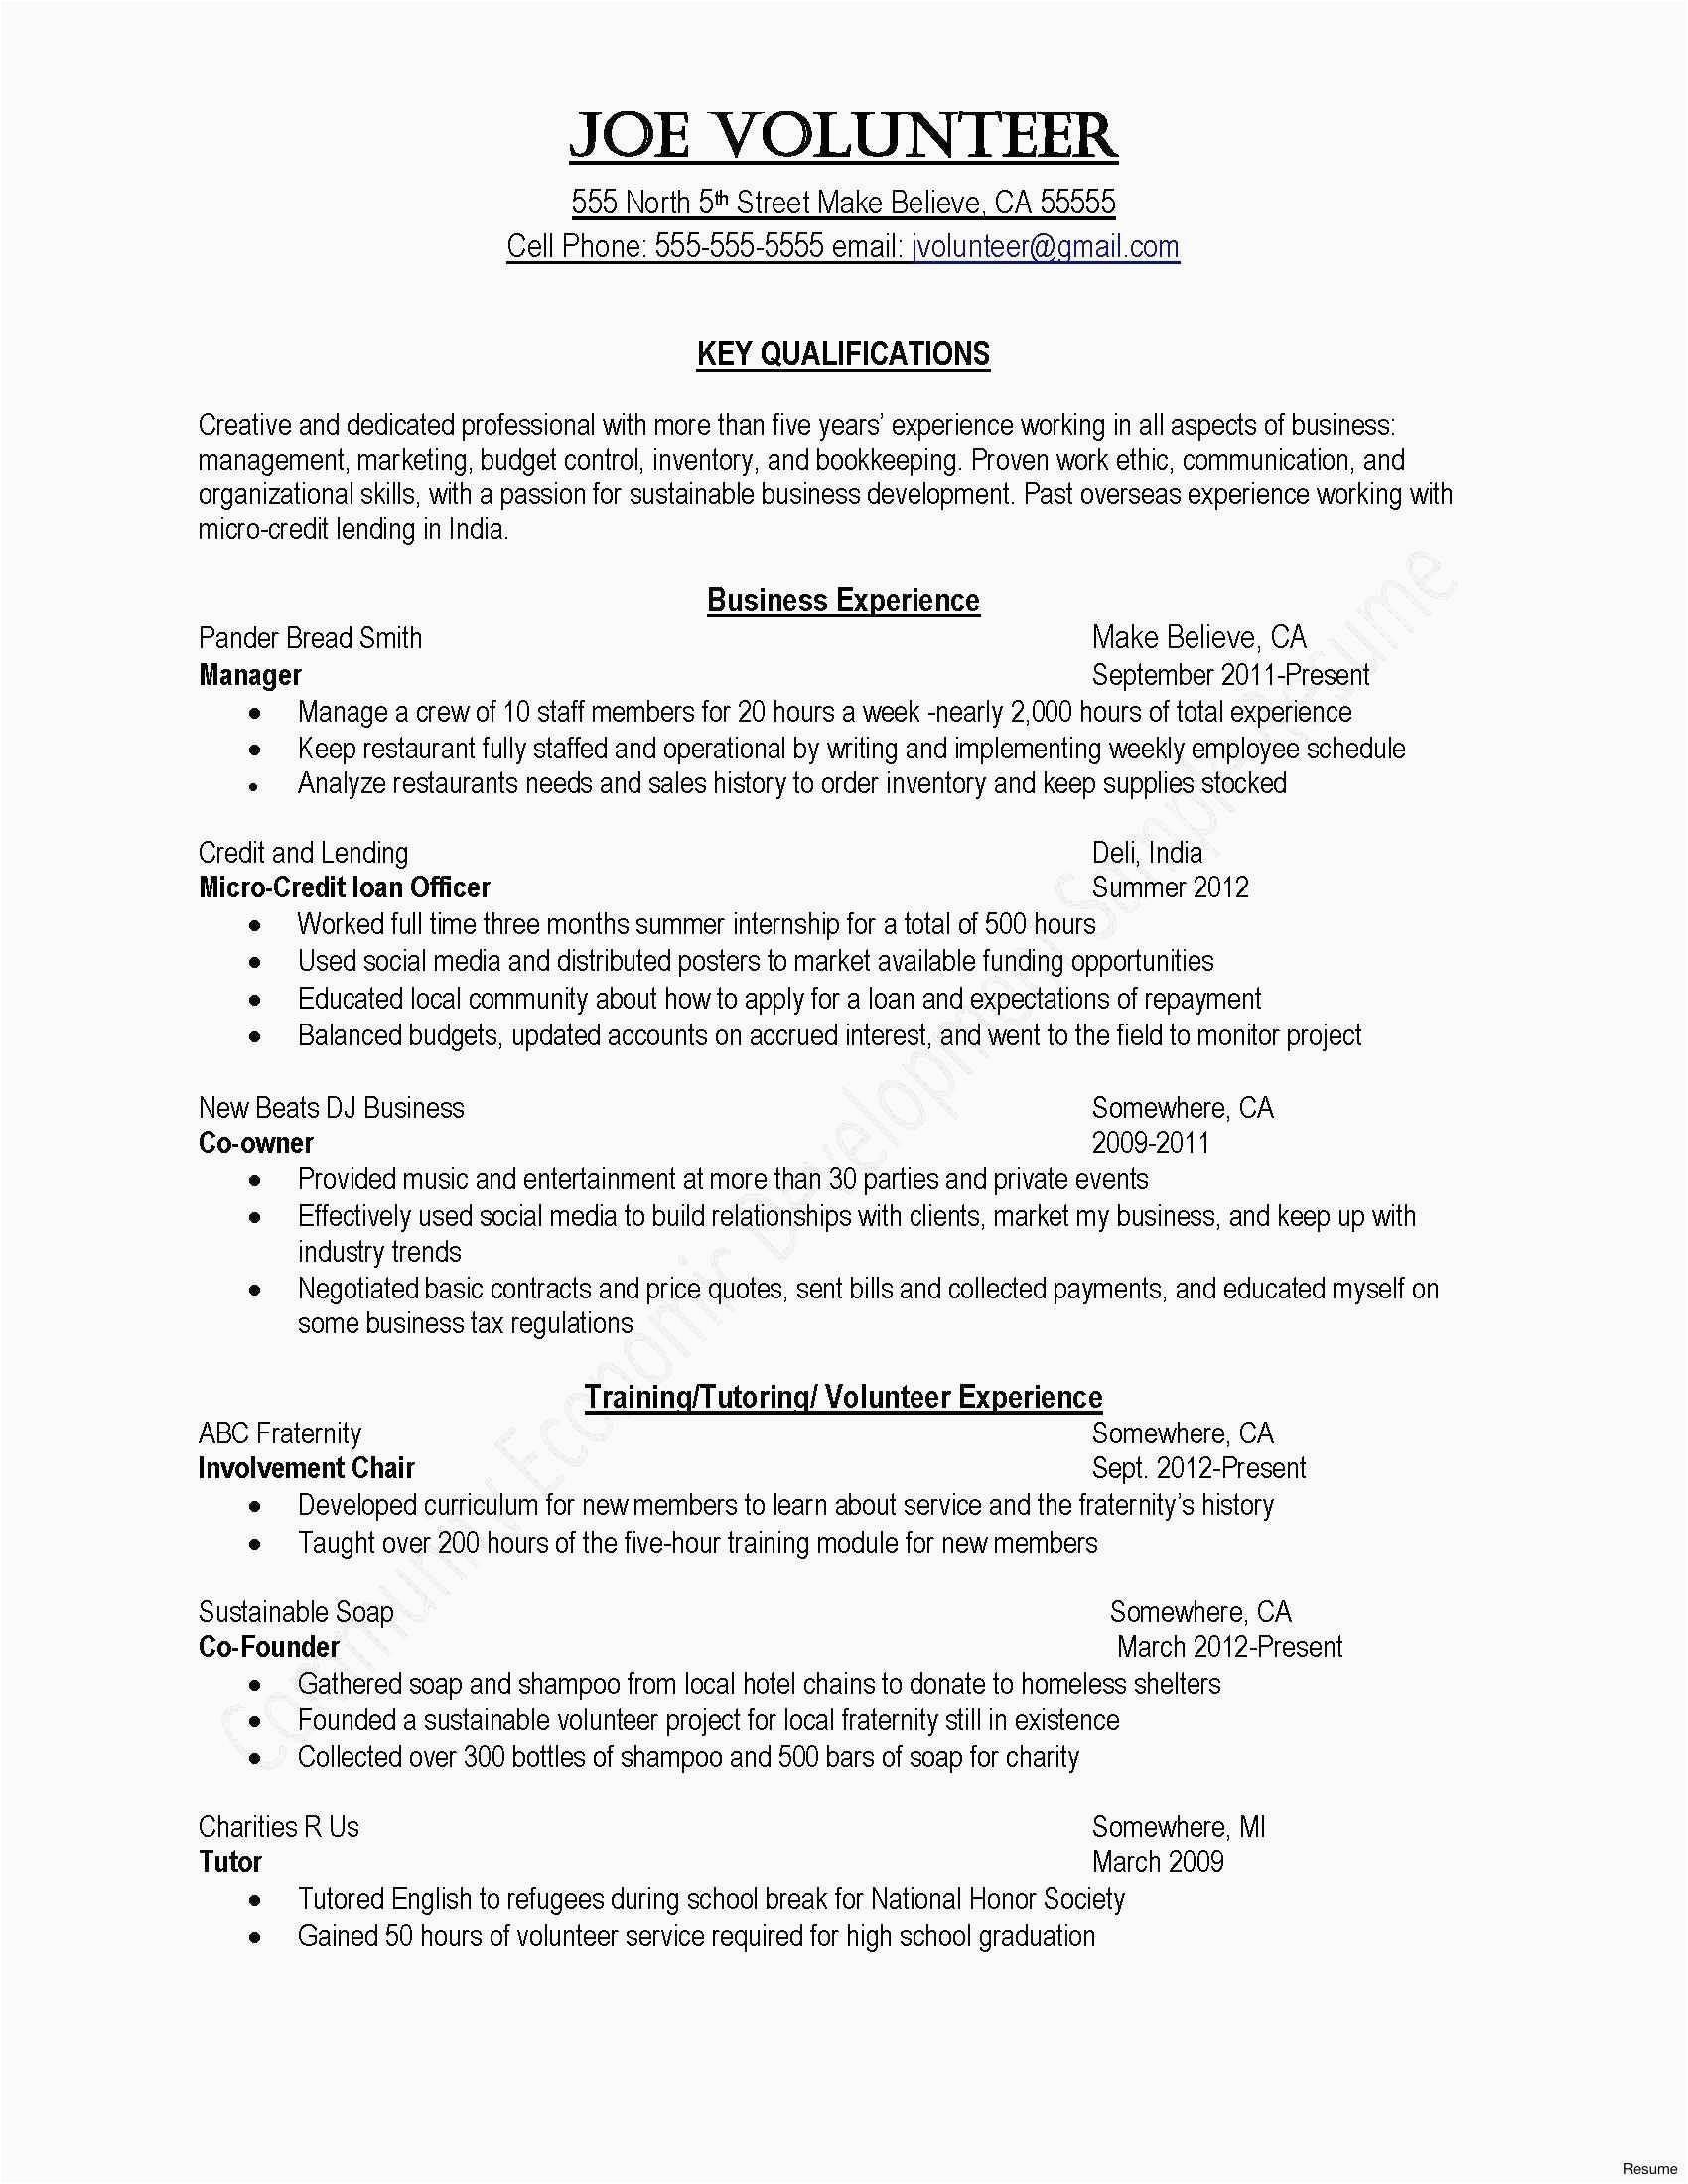 Sample Resume for Retired Person Returning to Work 44 Beautiful Sample Resume for Retired Person Returning to